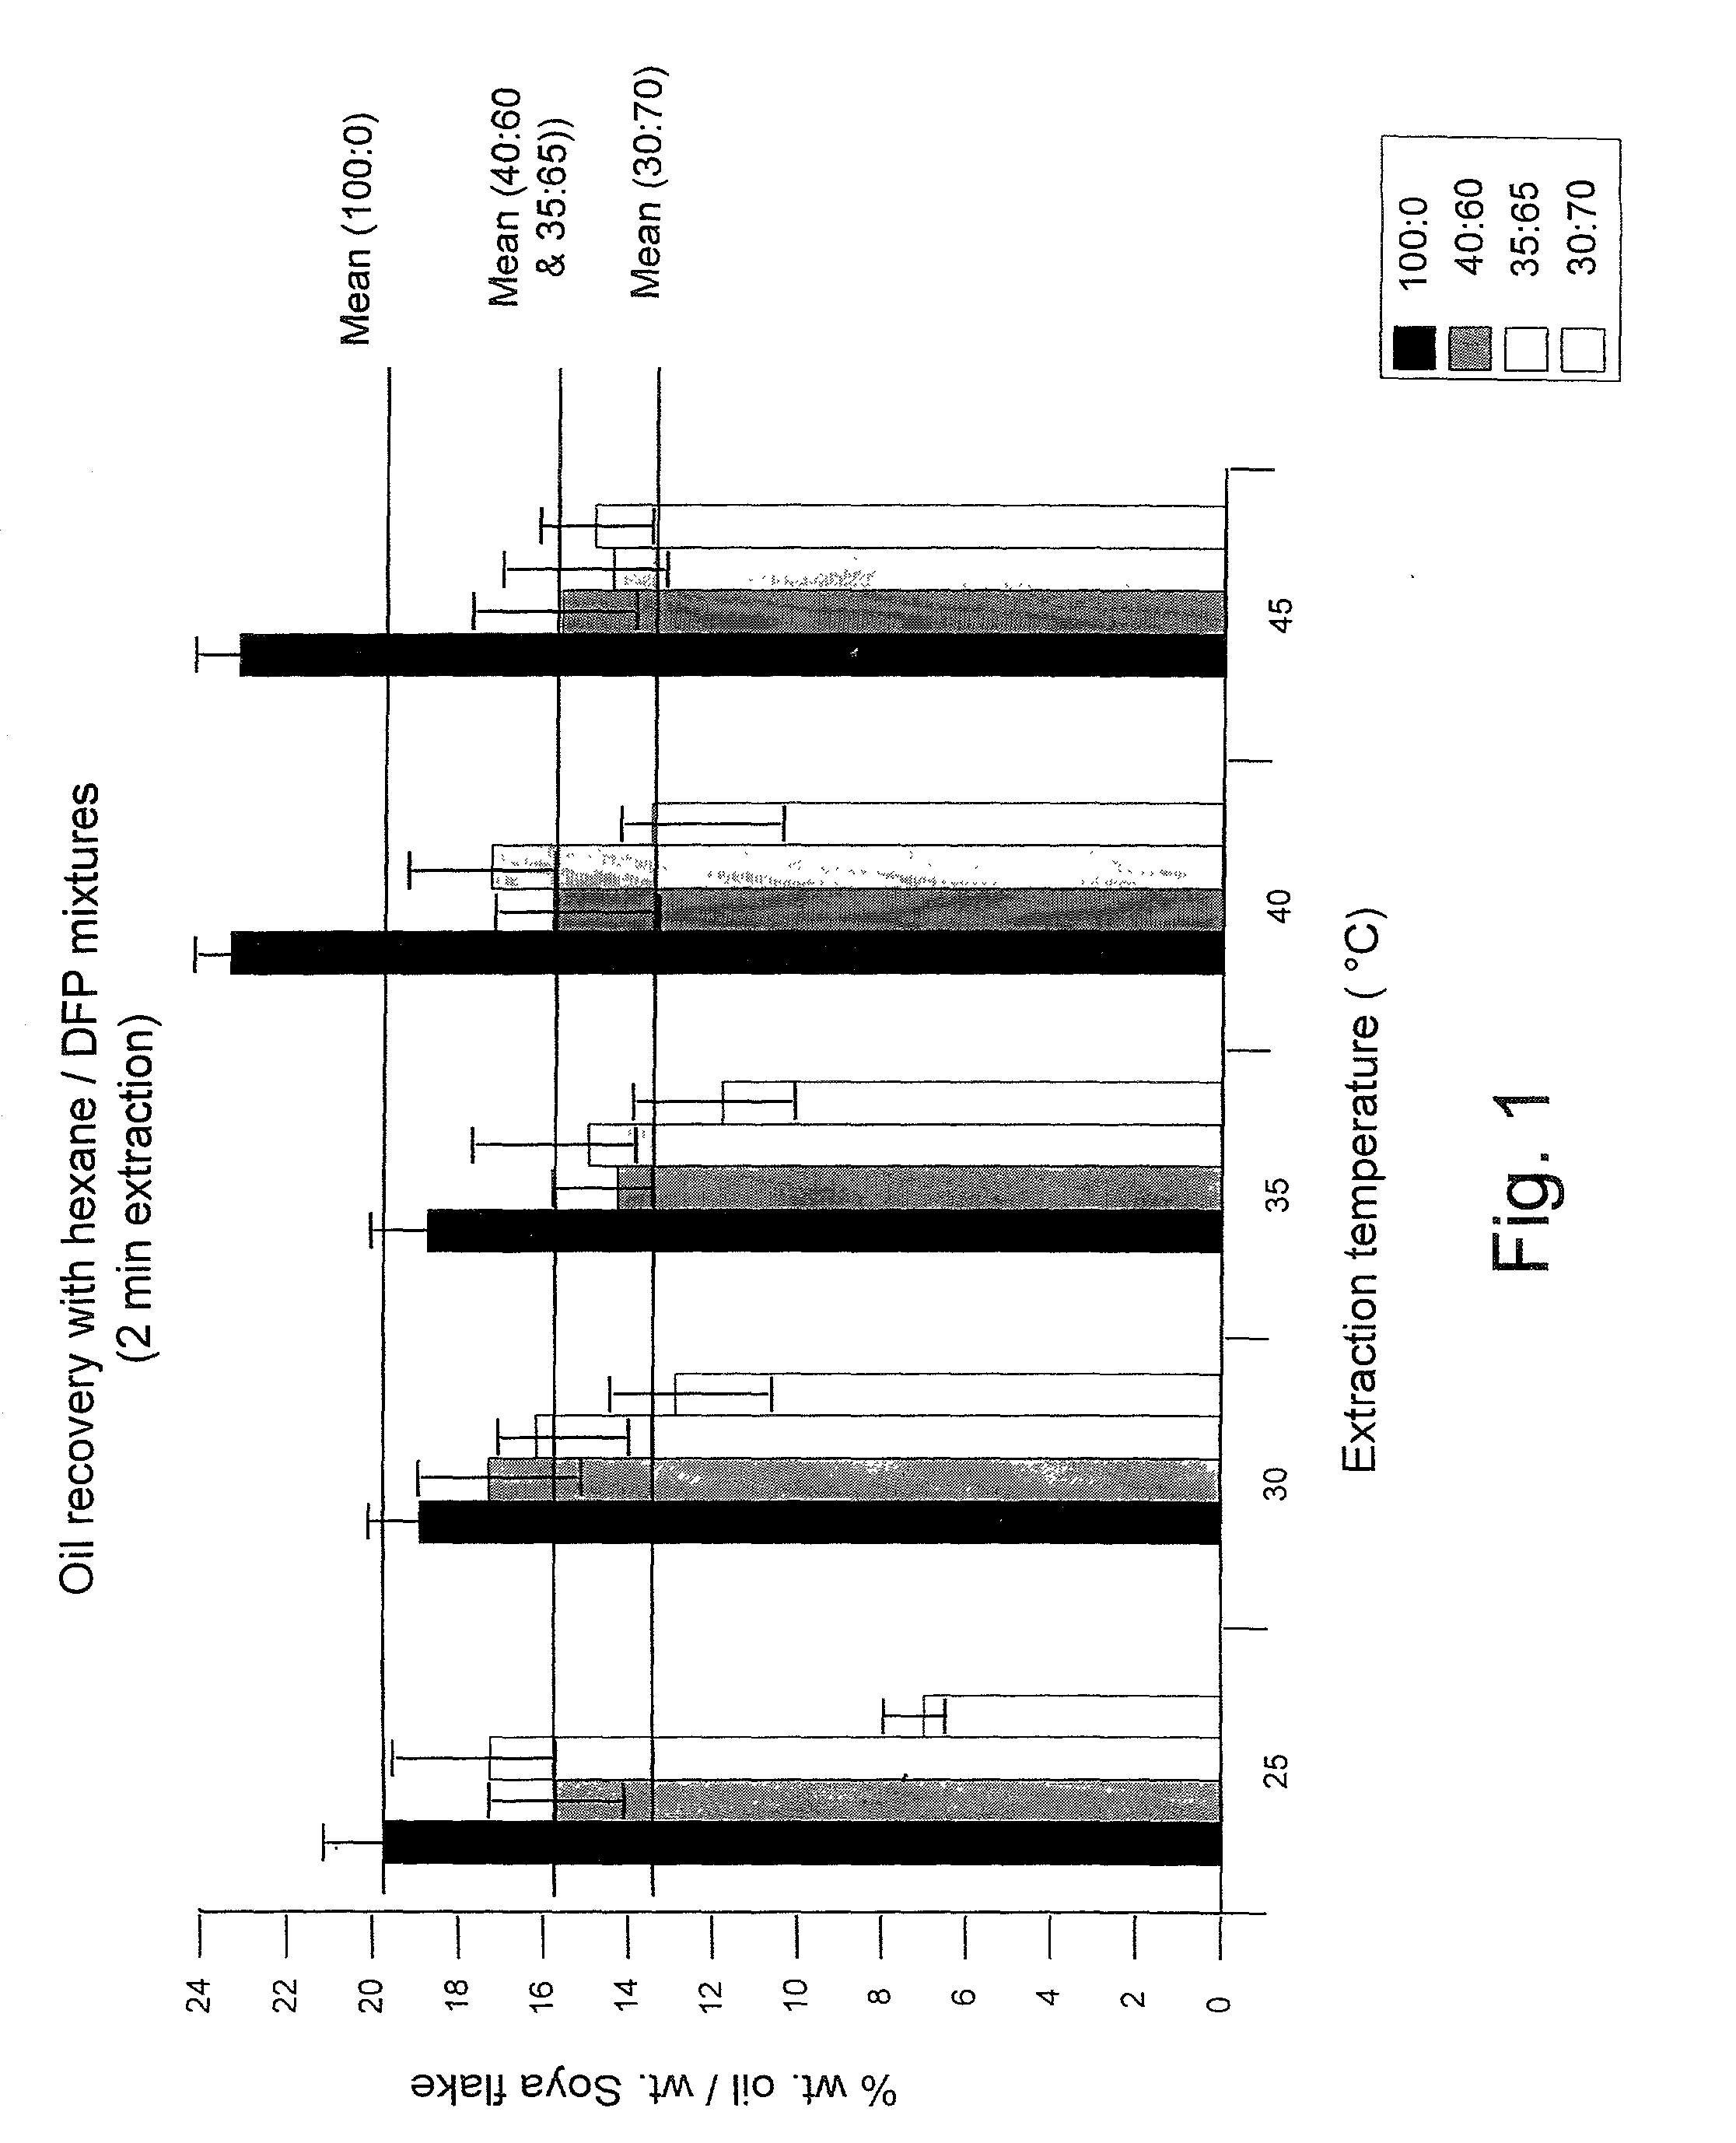 Solvent and method for extraction of triglyceride rich oil